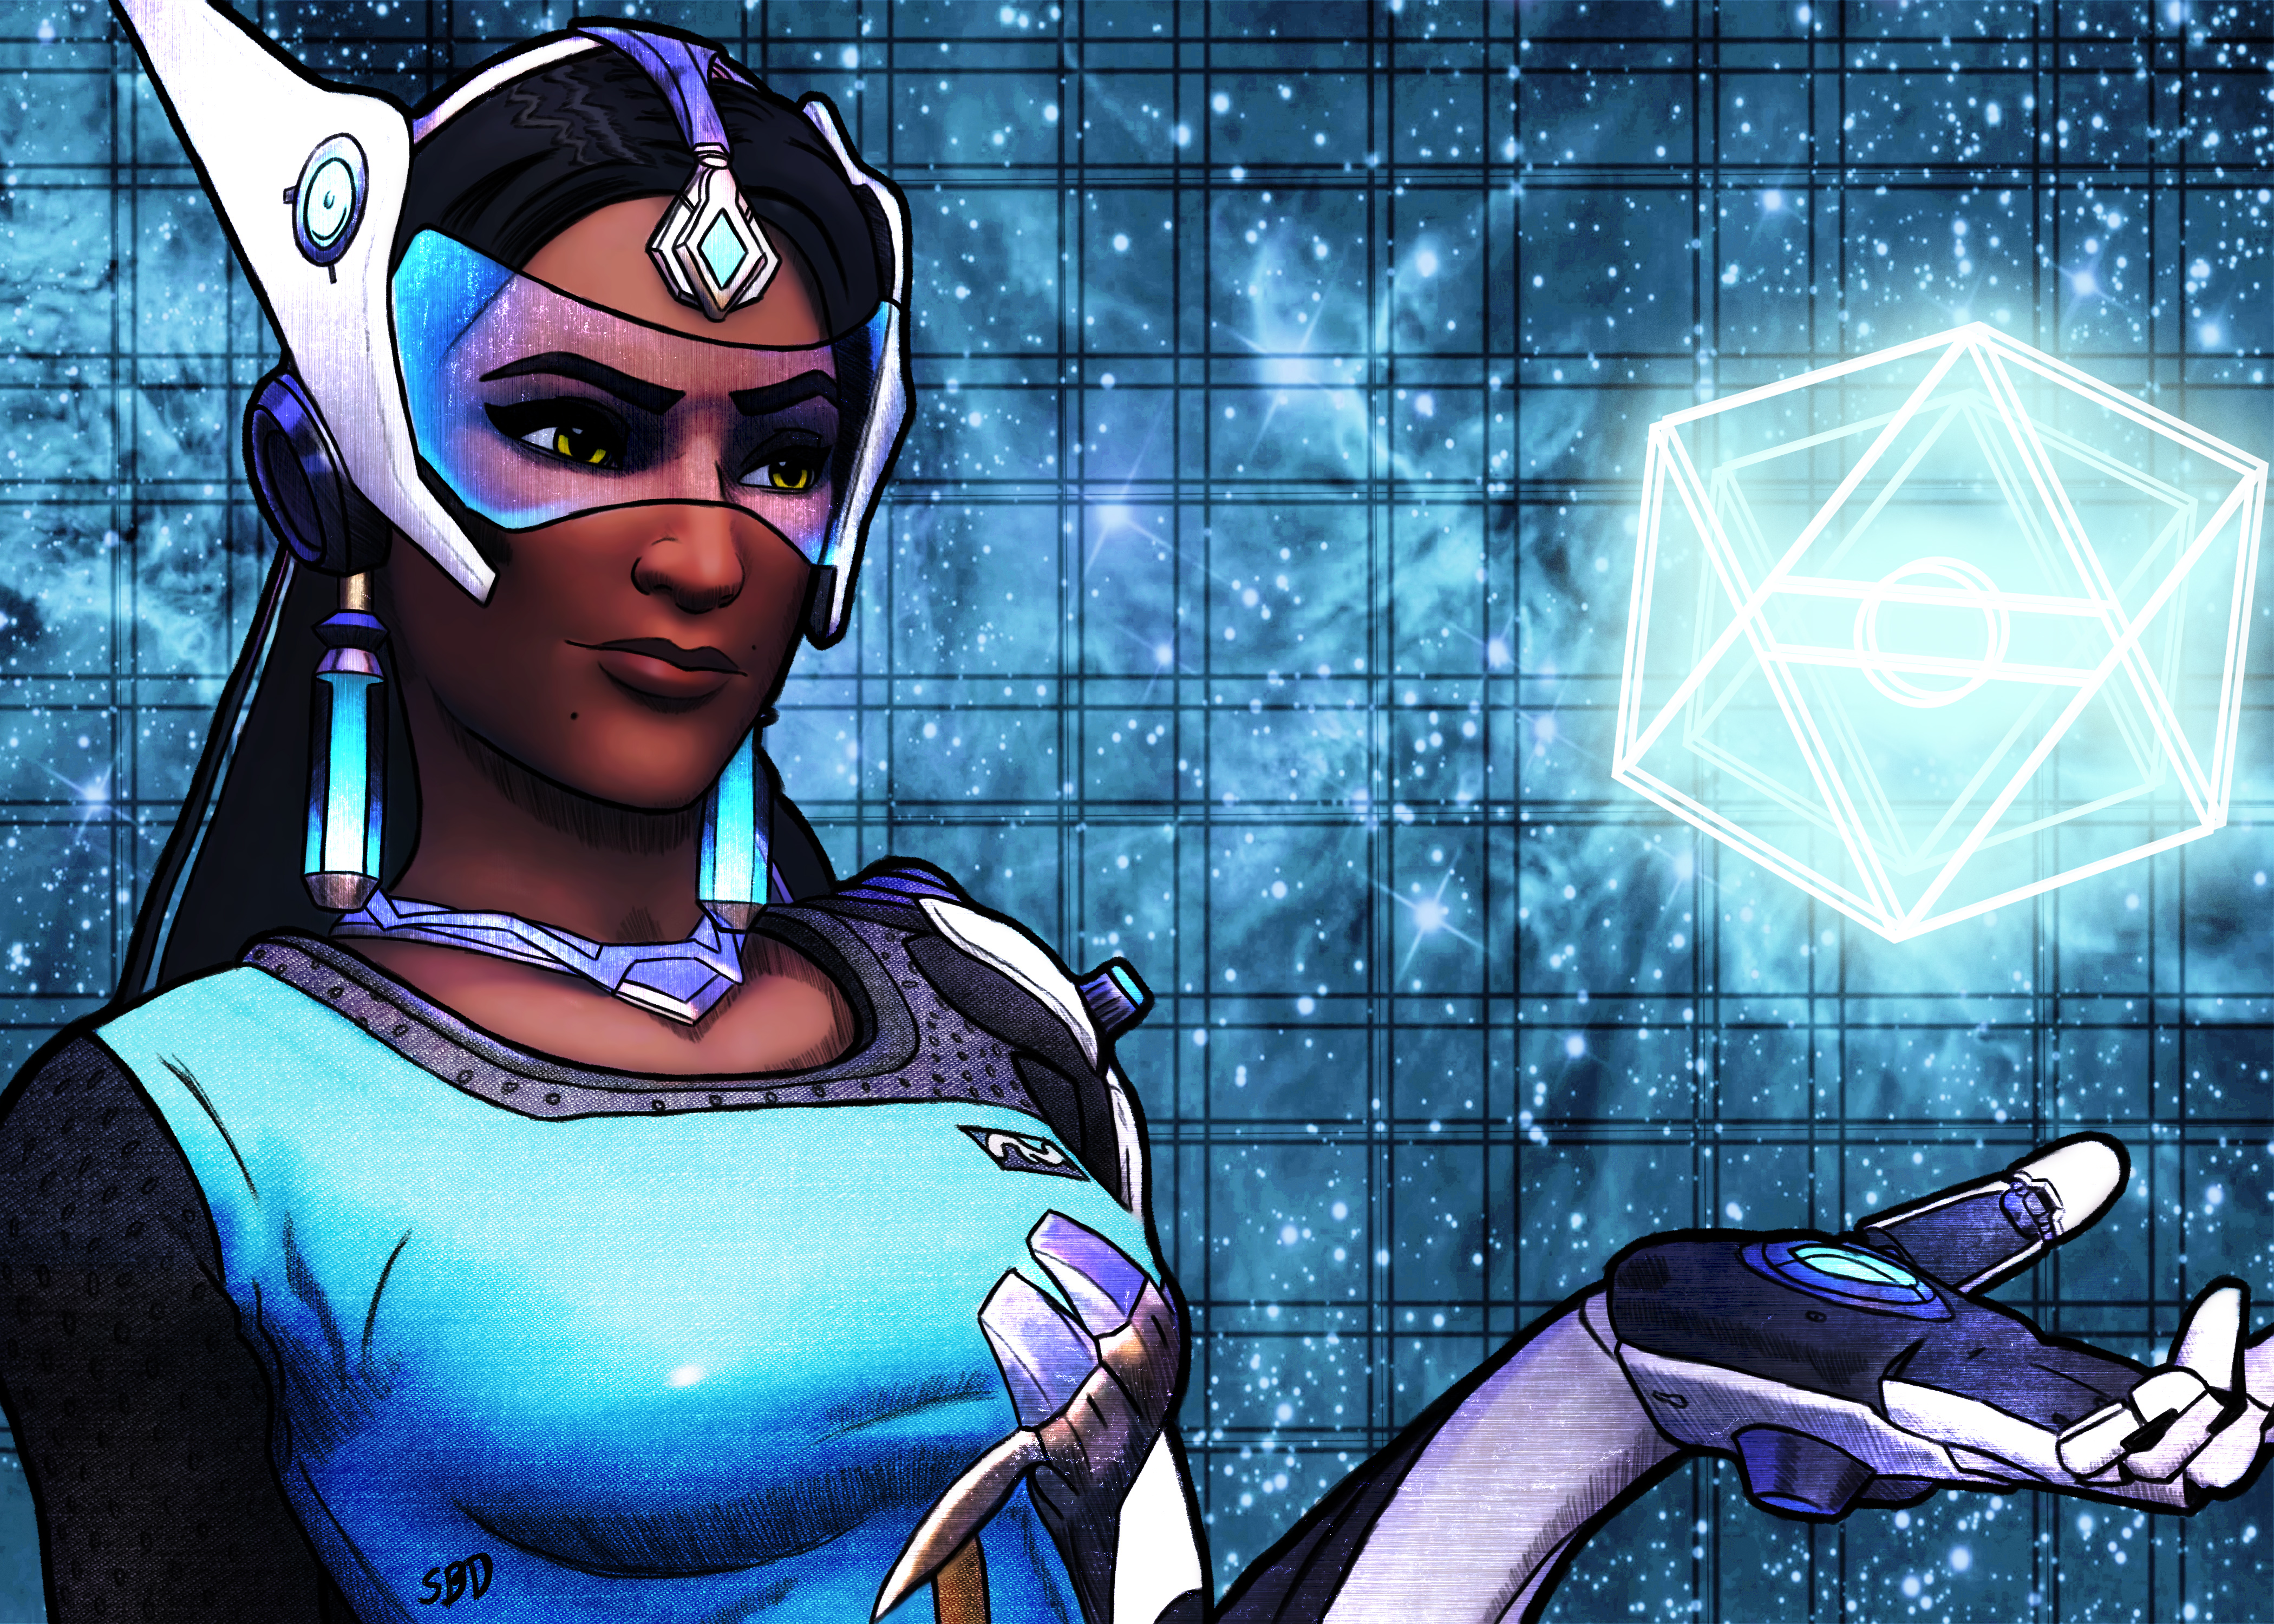 Symmetra Overwatch Wallpaper Iphone. archive.gathering.org. 